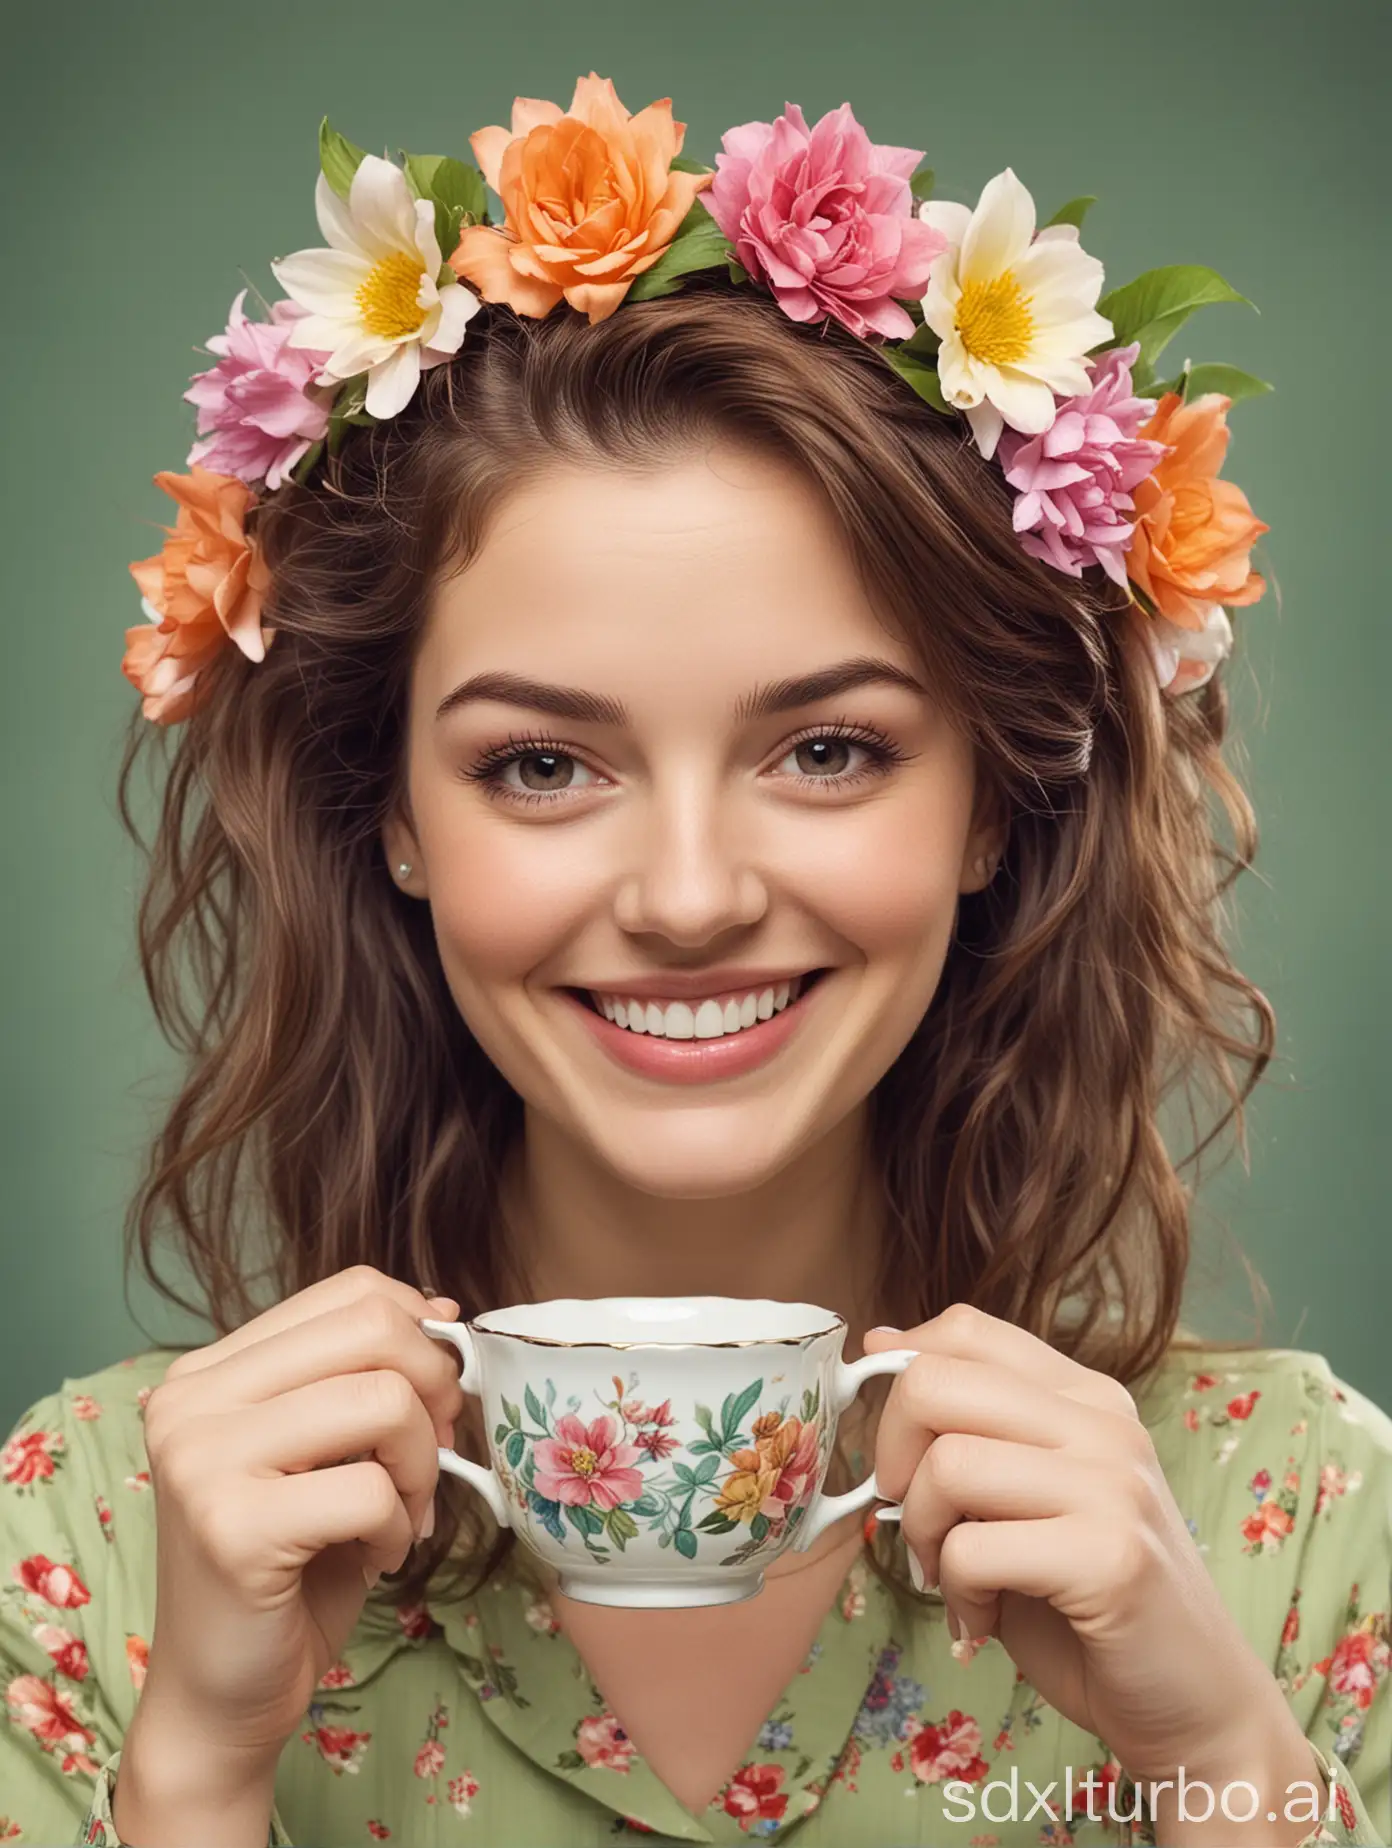 A smiling woman with a flower in her hair sips from a tea cup with the caption 'They're doing it again because you didn't hang them last time.'